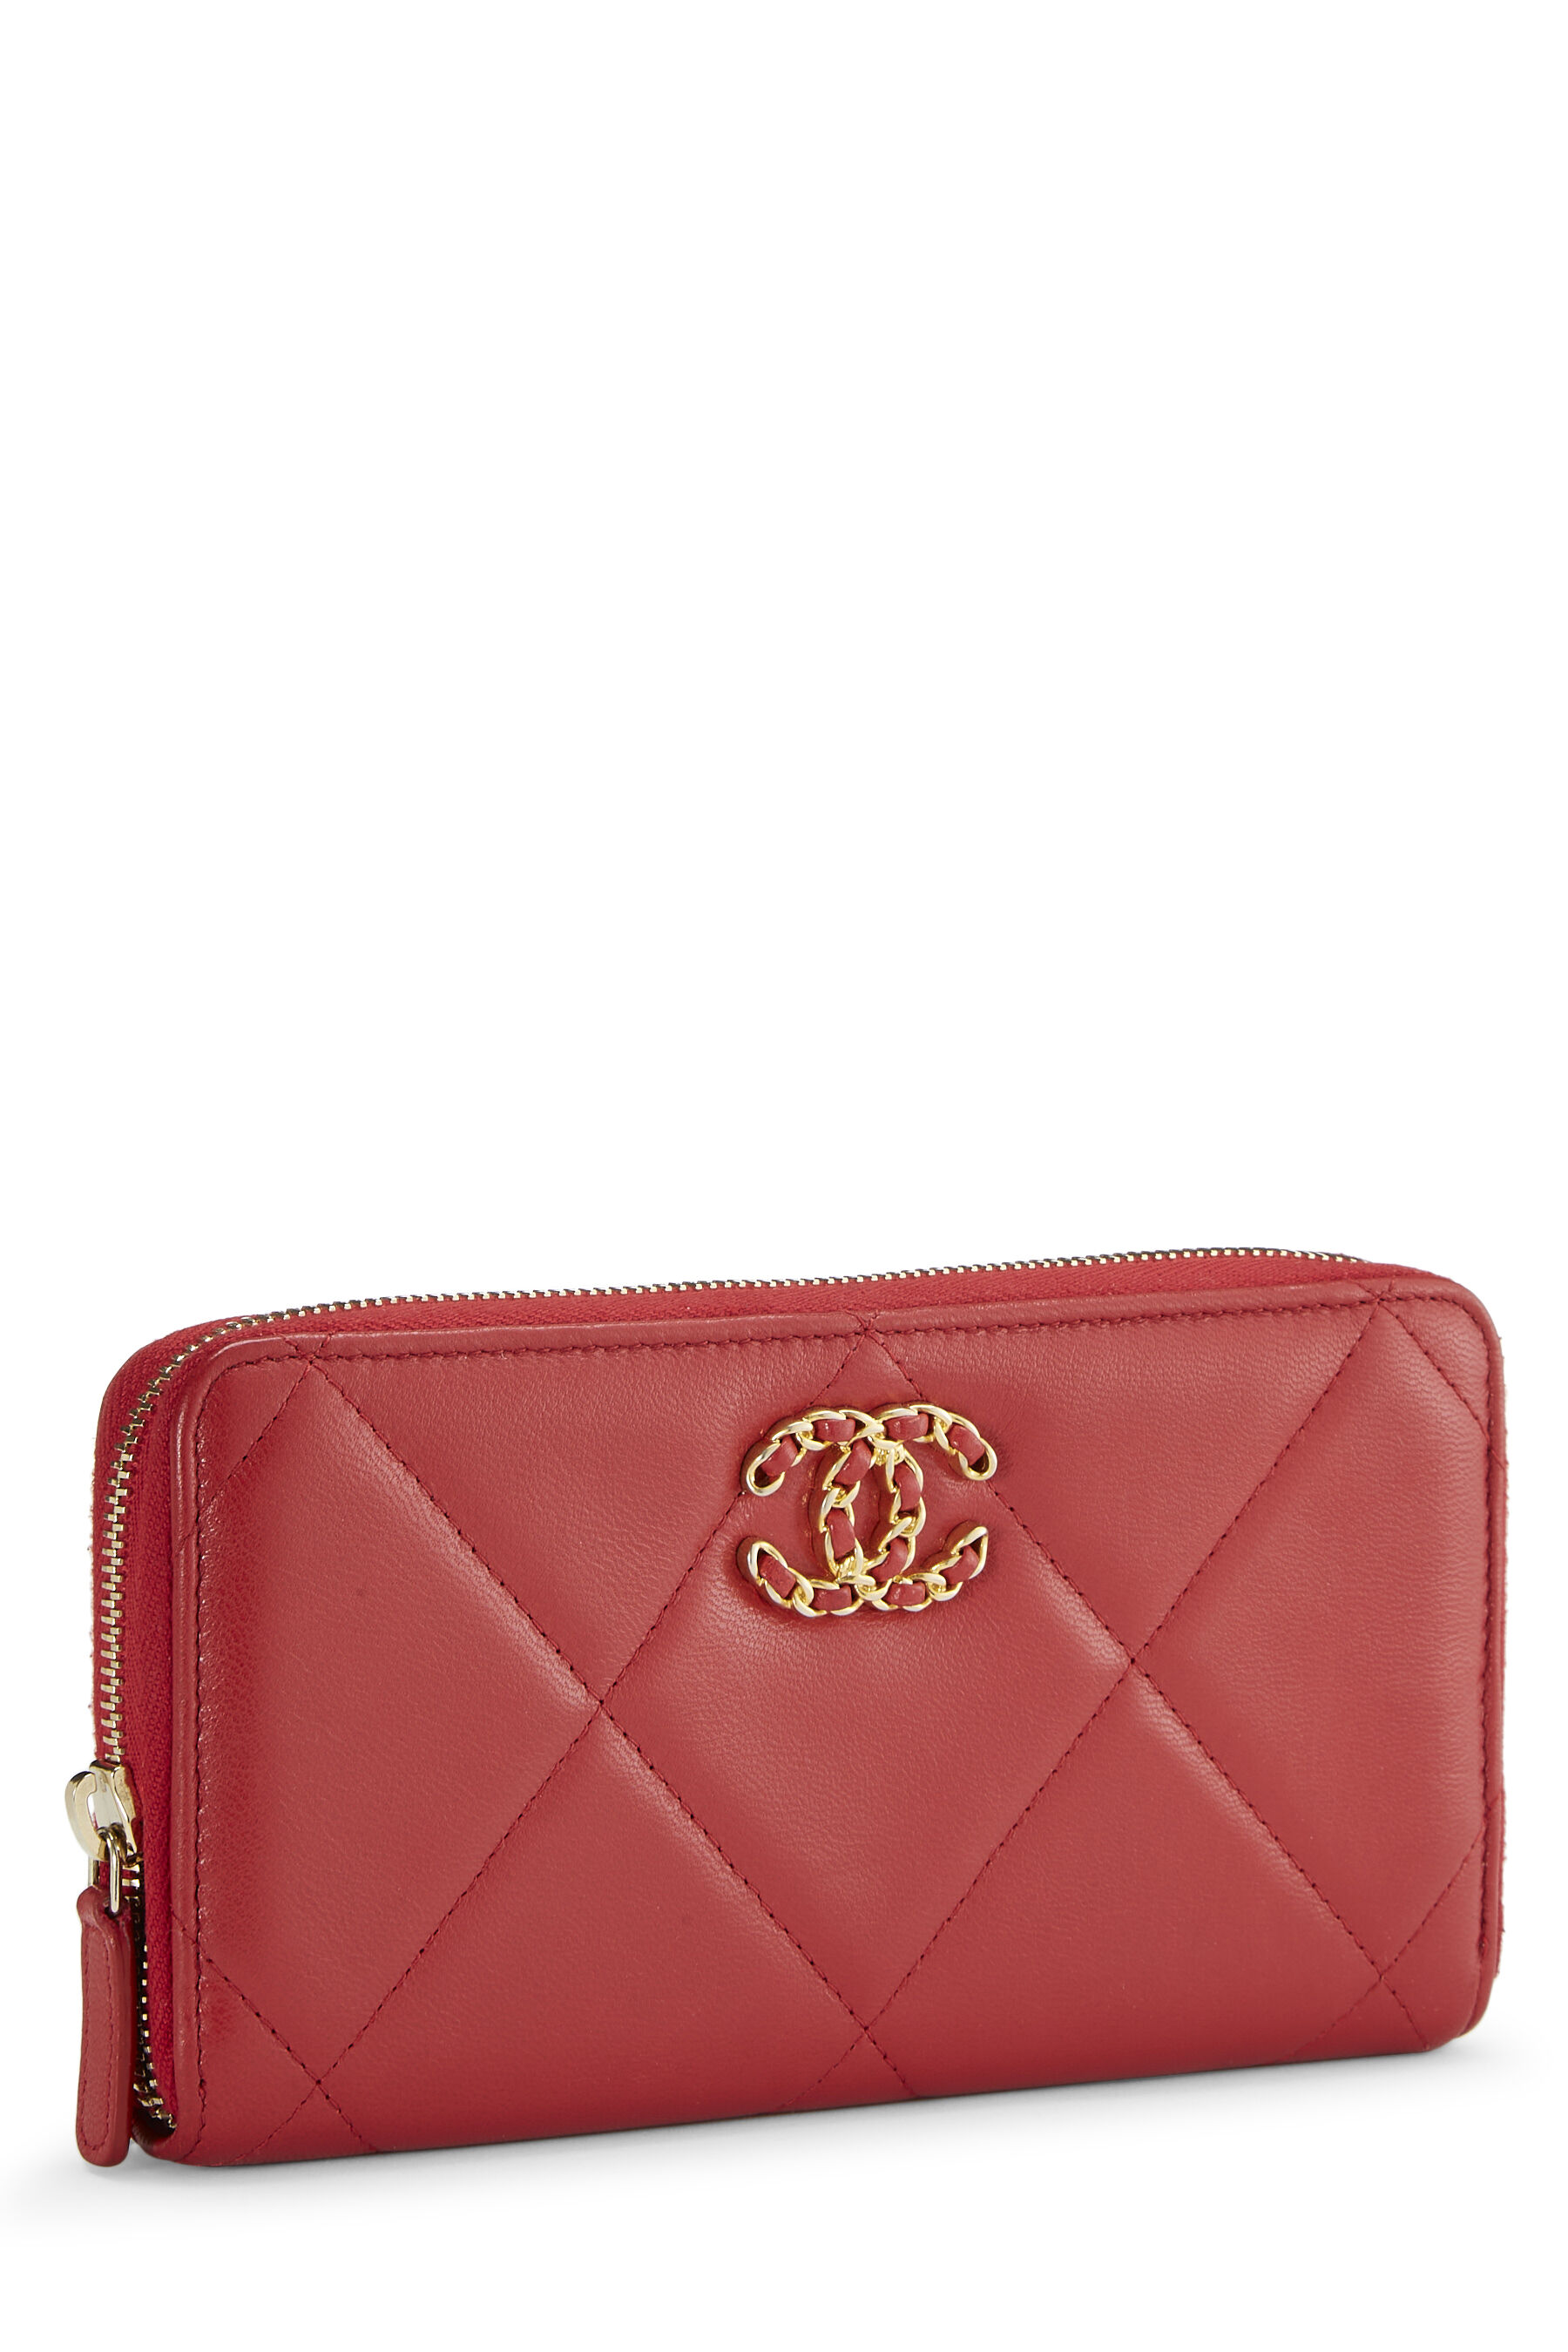 CHANEL Lambskin Quilted Chanel 19 Zip Card Holder Wallet White |  FASHIONPHILE